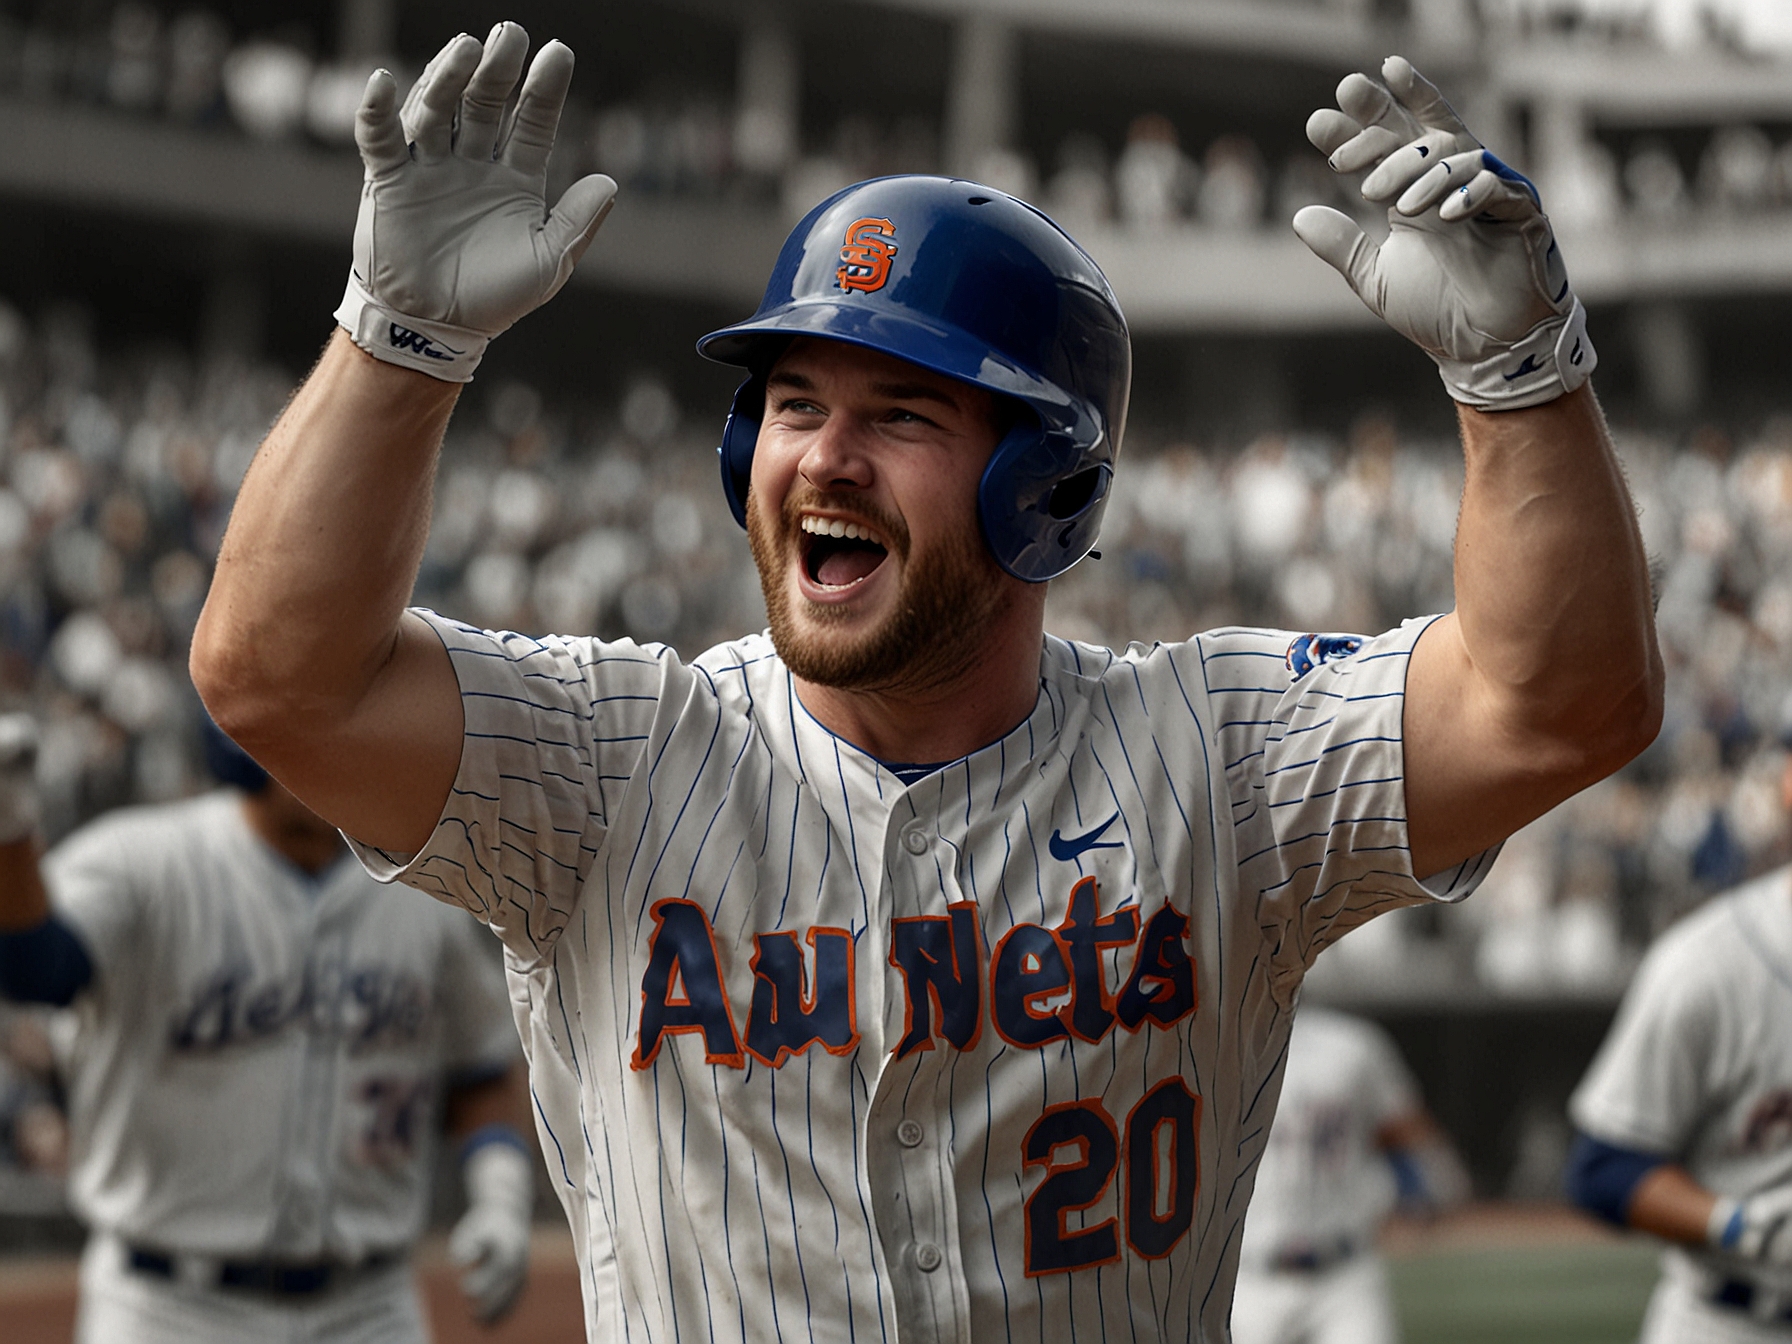 Pete Alonso celebrating after hitting a home run during the game against the San Diego Padres.